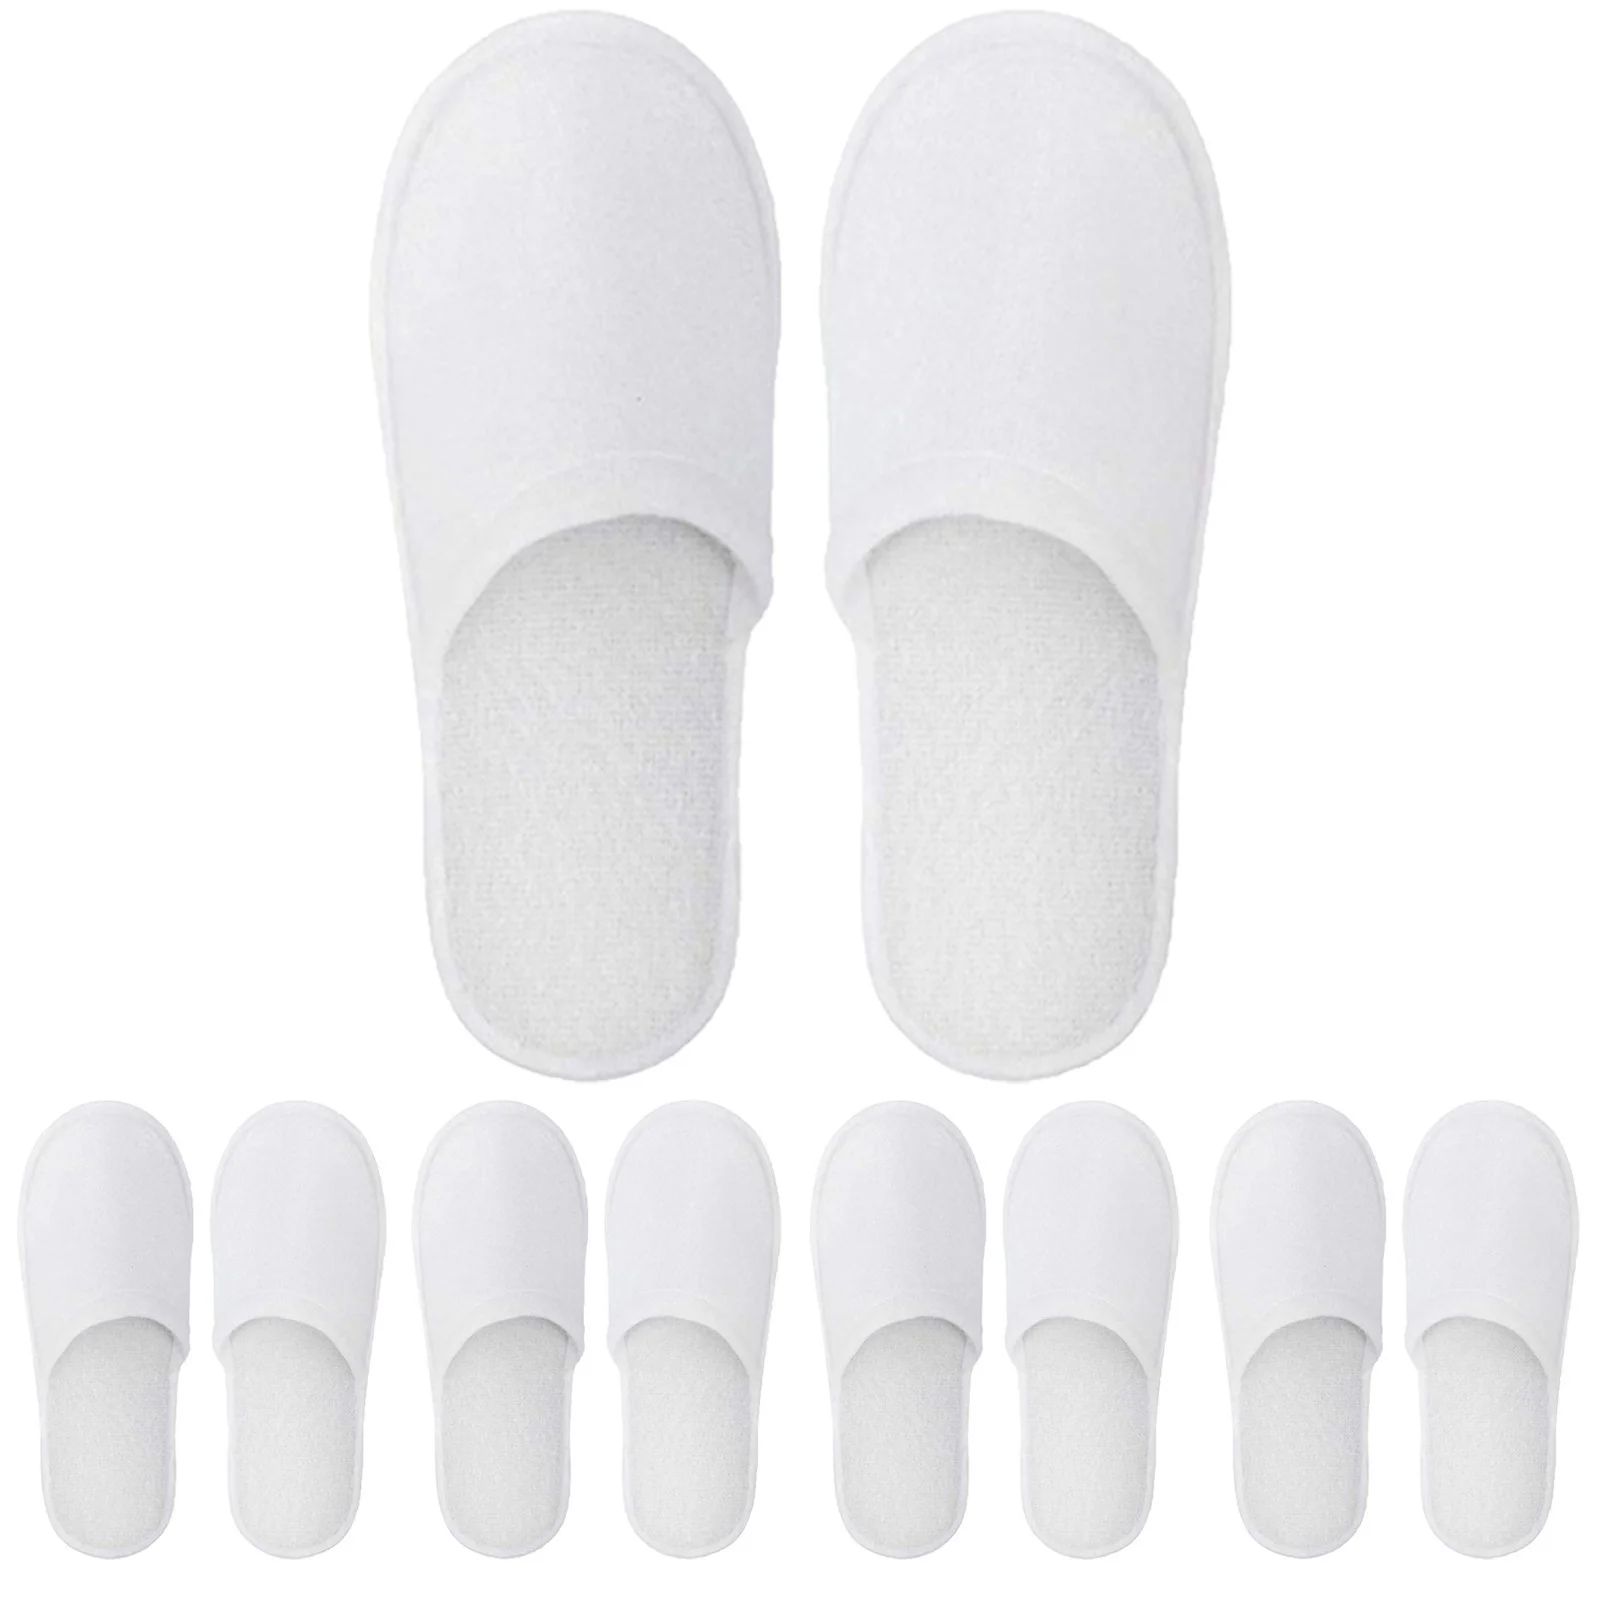 

1pair Disposable Travel Hotel Slippers White Towelling Closed Toe Spa Shoes Bathroom Sets Washroom Shower Bath Accessories